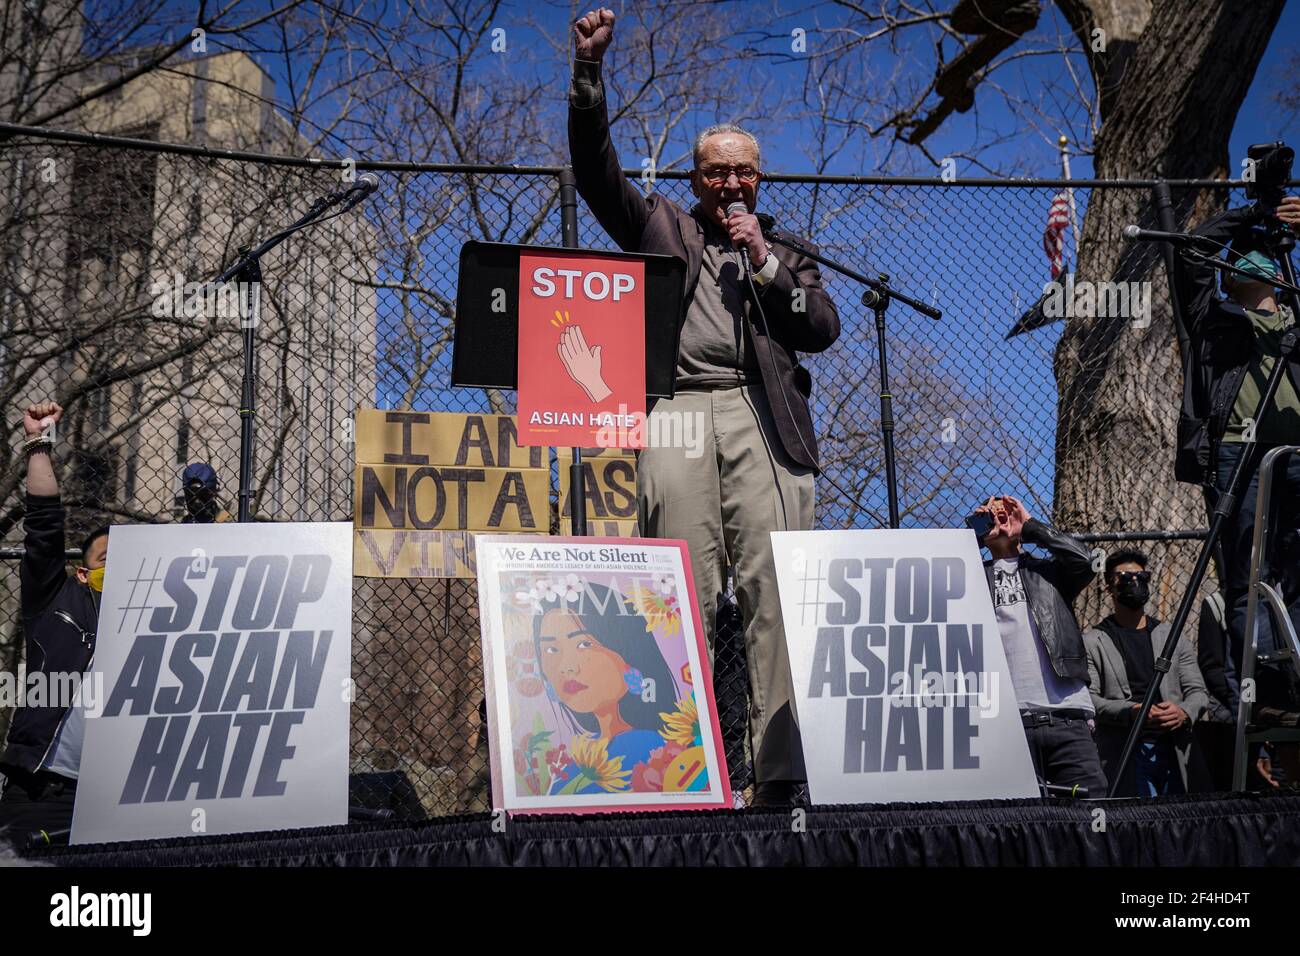 New York City, USA. 20th Mar, 2021. Senate Majority Leader Chuck Schumer (D-NY) speaks during a Stop the Hate rally in Chinatown in New York City, USA. Credit: Chase Sutton/Alamy Live News Stock Photo